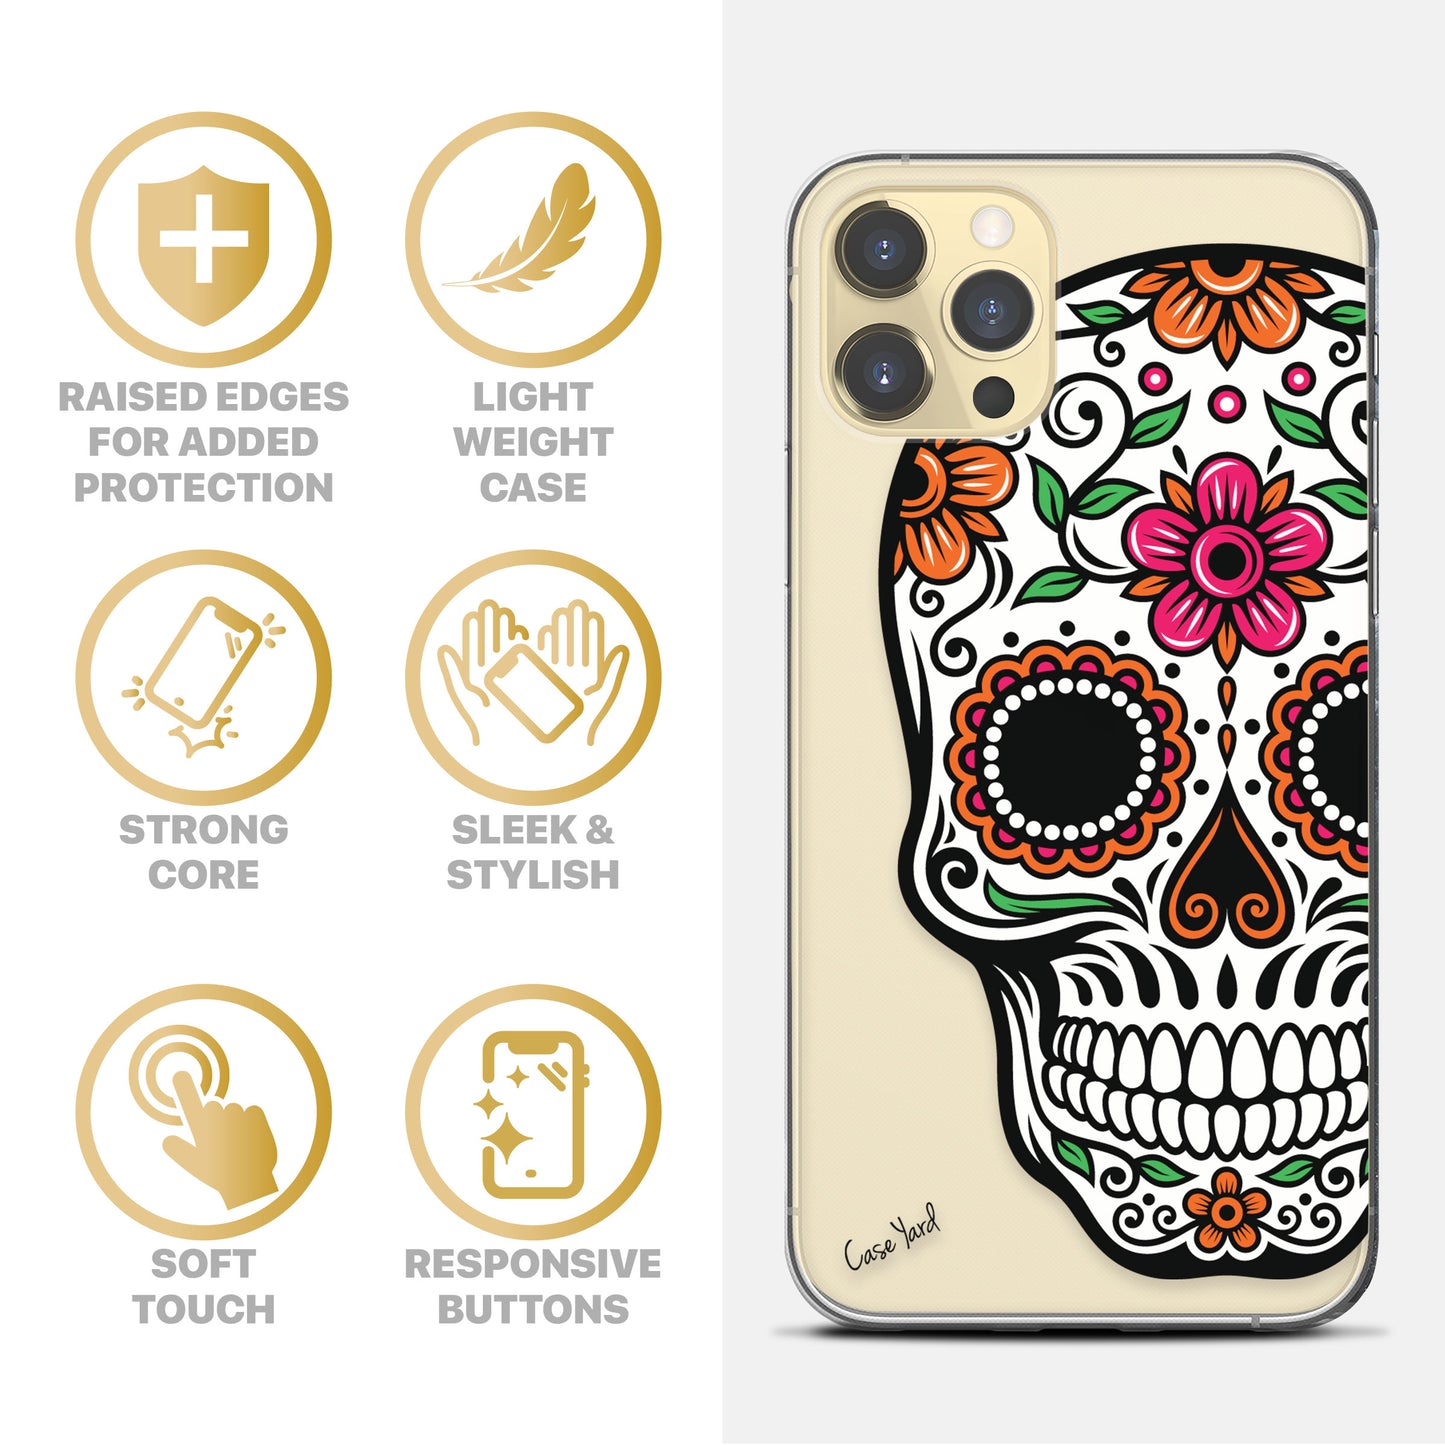 TPU Clear case with (Color Sugar Skull) Design for iPhone & Samsung Phones